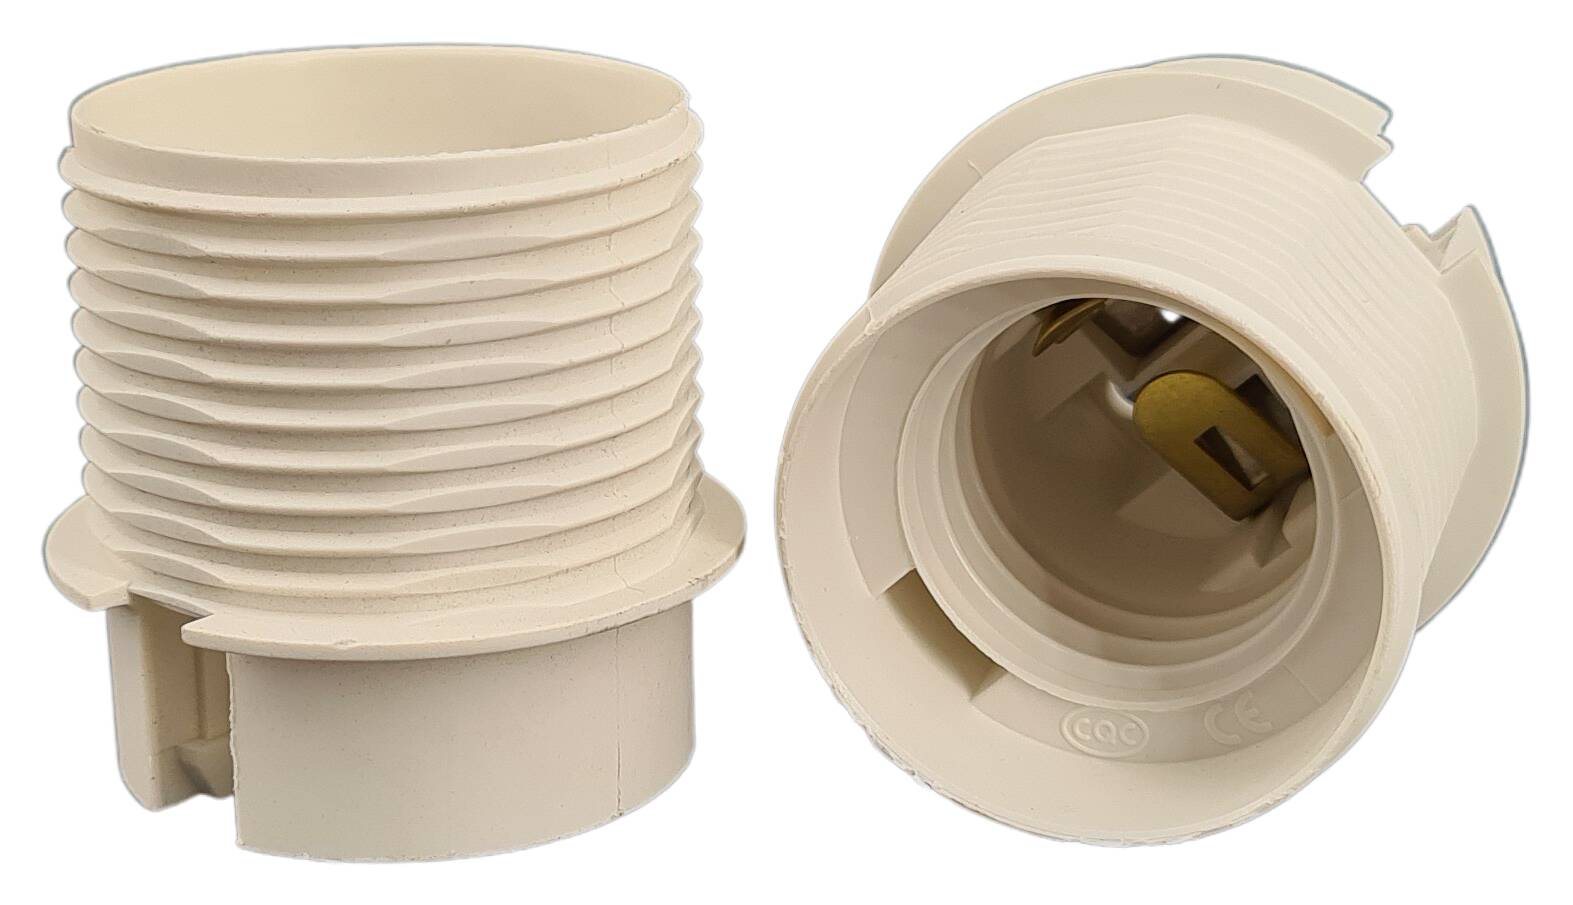 E27 partial-threaded for thermoplastic lampholder white